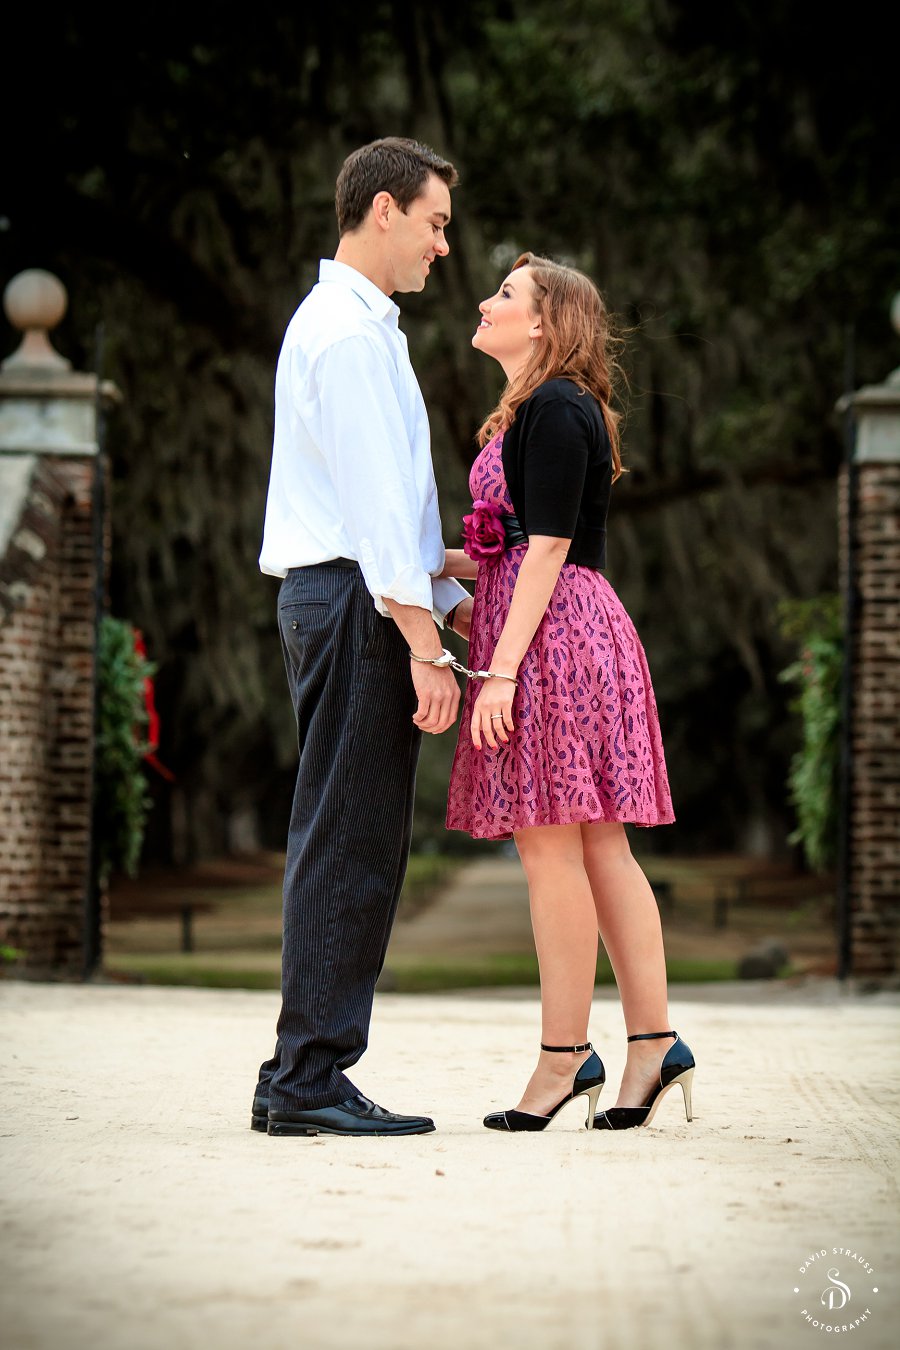 Boone Hall Engagement Pictures - Charleston Wedding Photographer David Strauss - Morgan and Andrew - 8